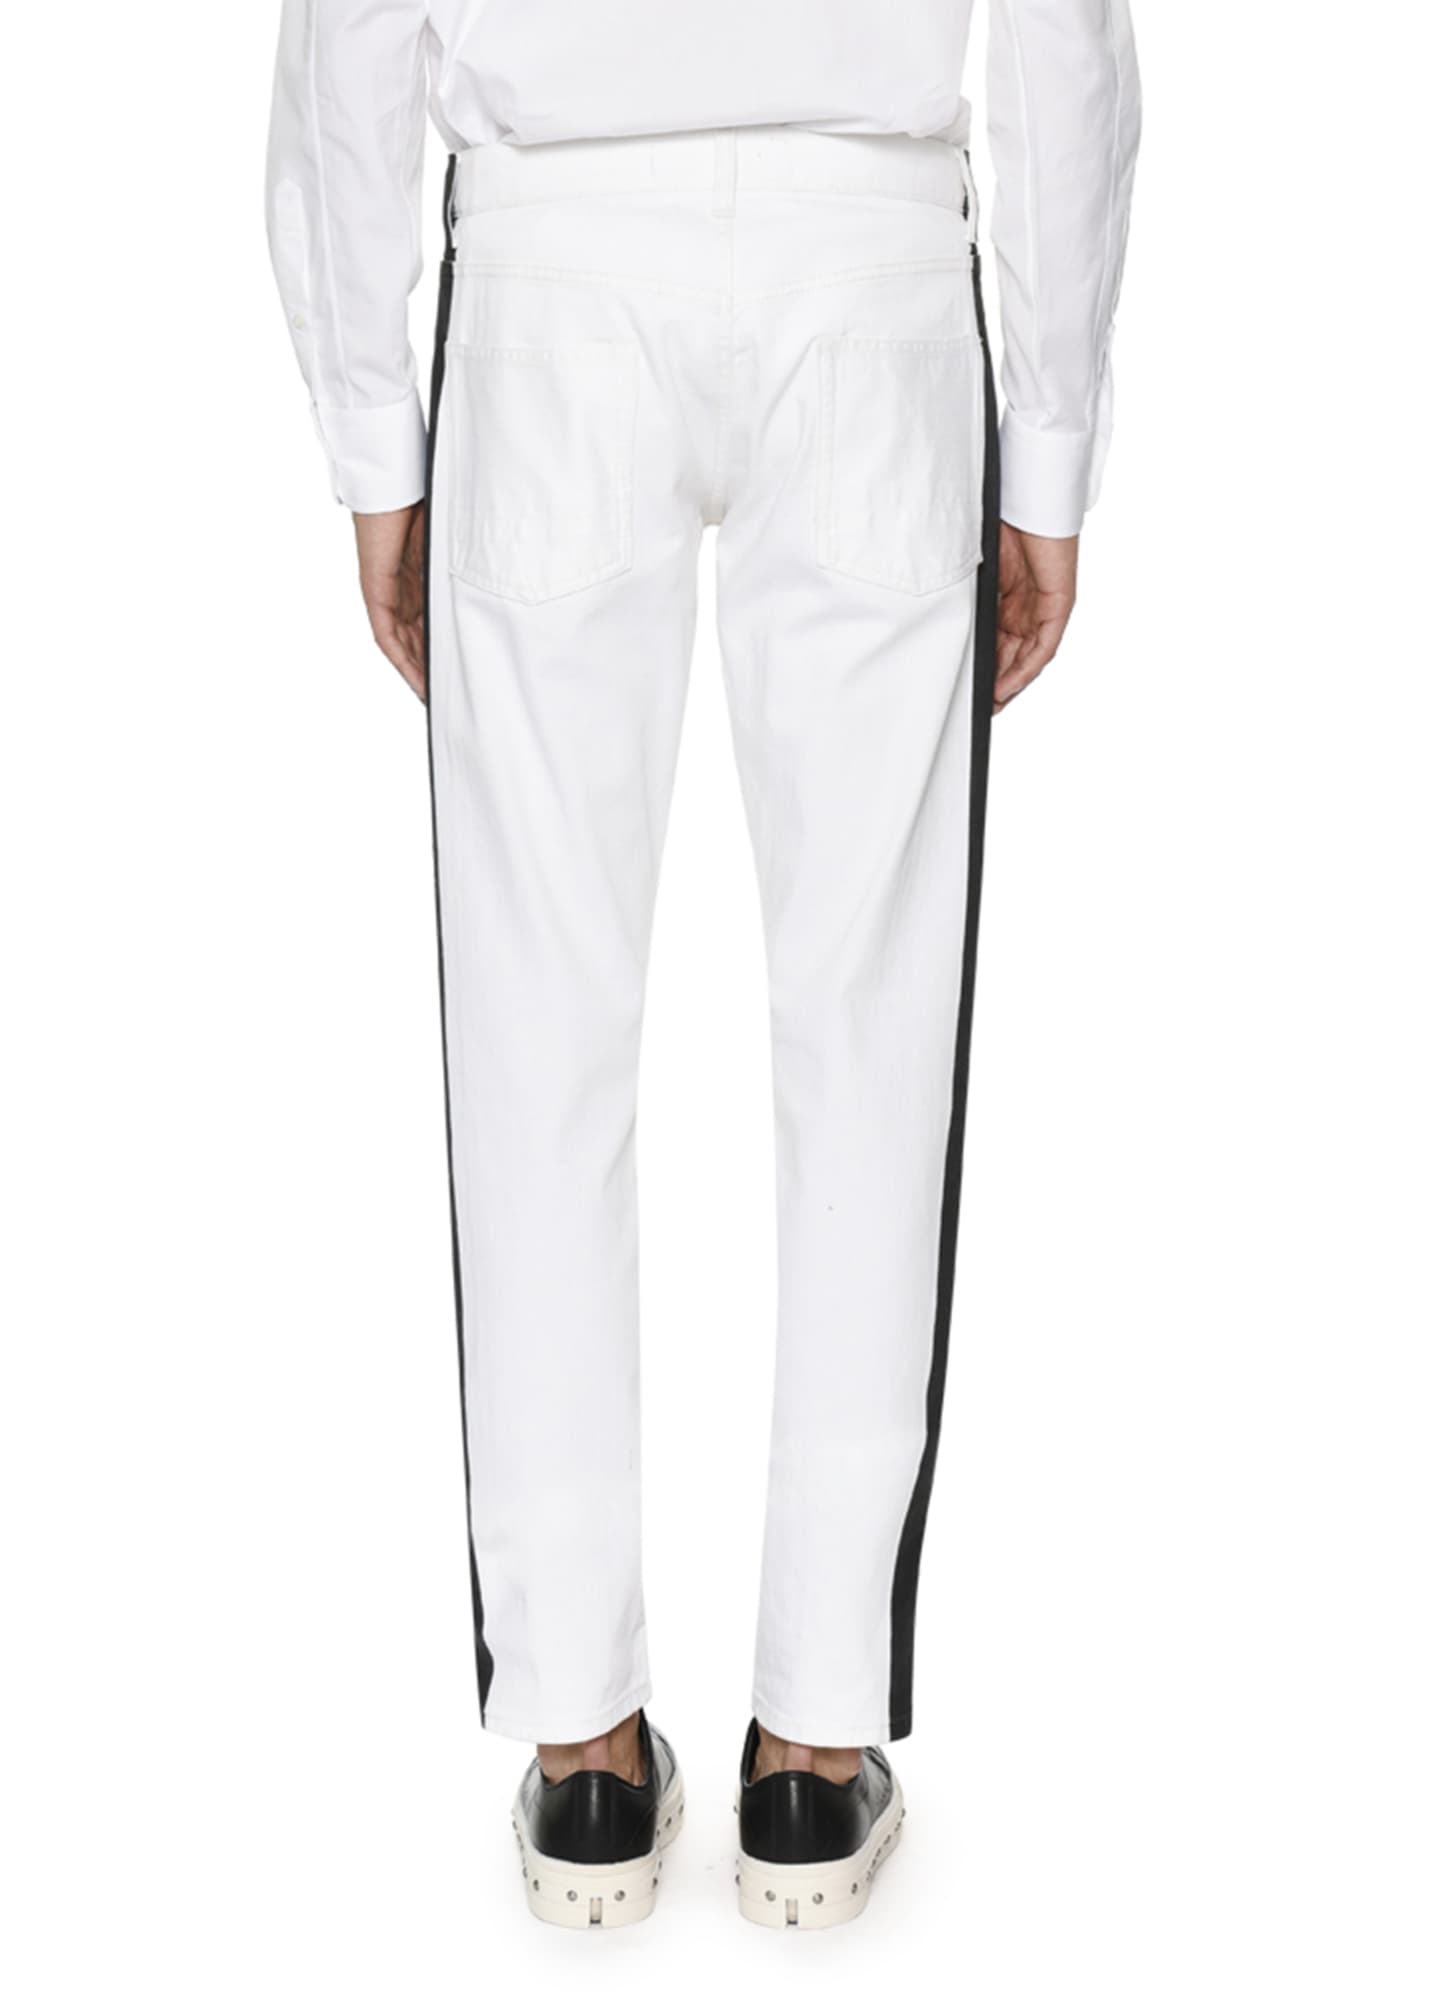 Alexander McQueen Side-Striped Slim-Straight Jeans Image 2 of 2